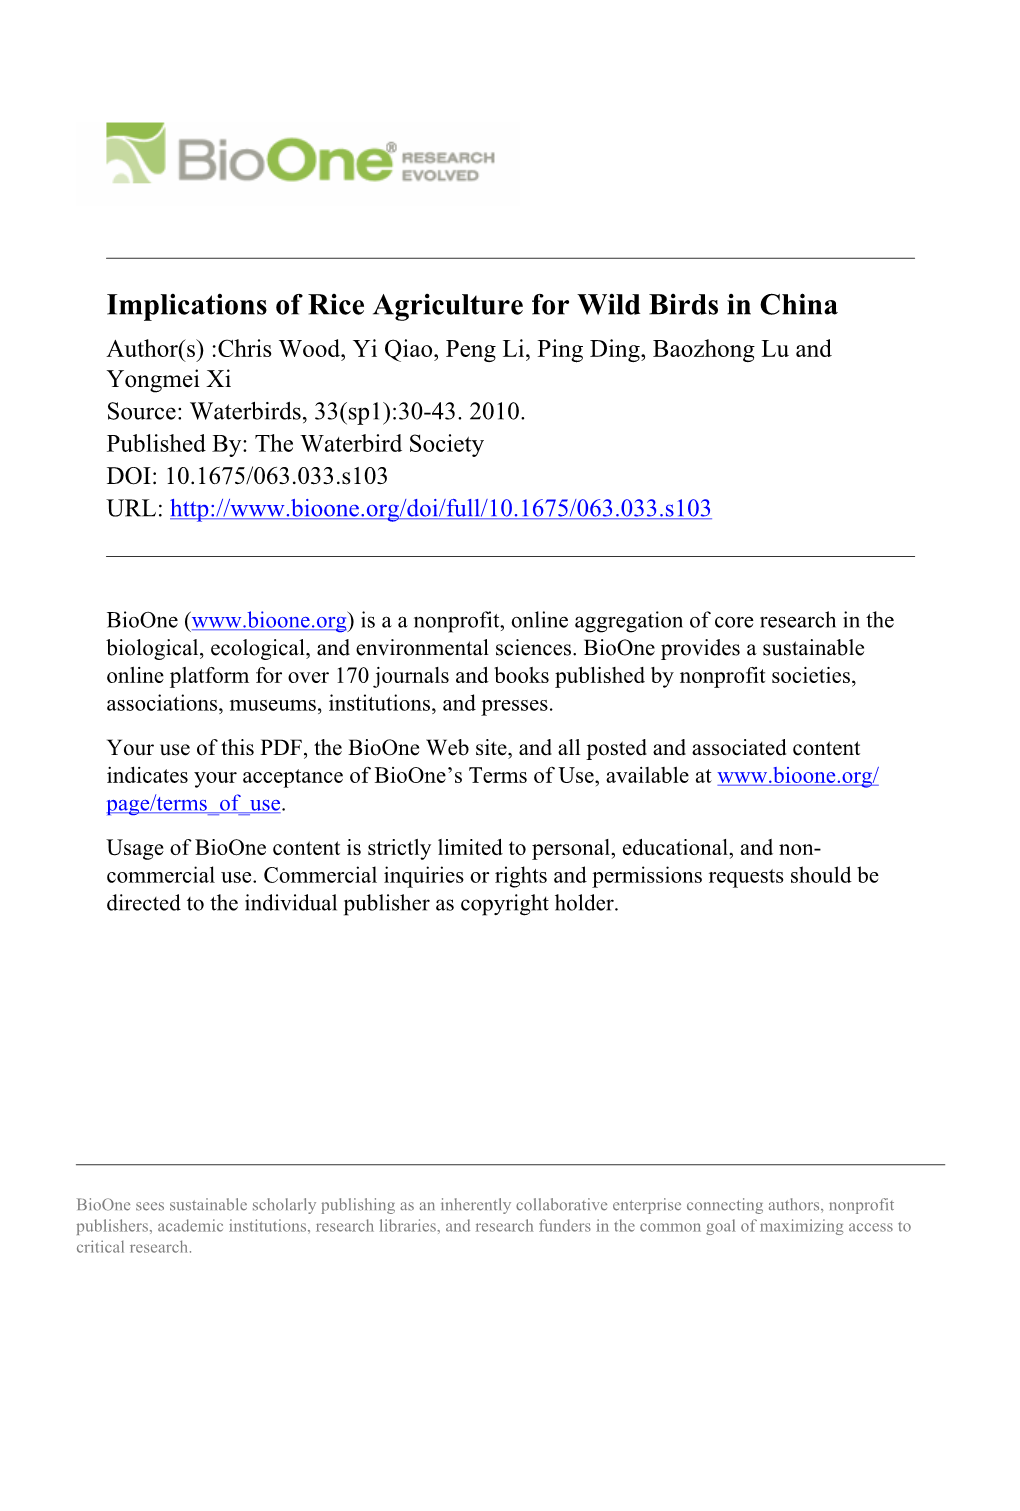 Implications of Rice Agriculture for Wild Birds in China